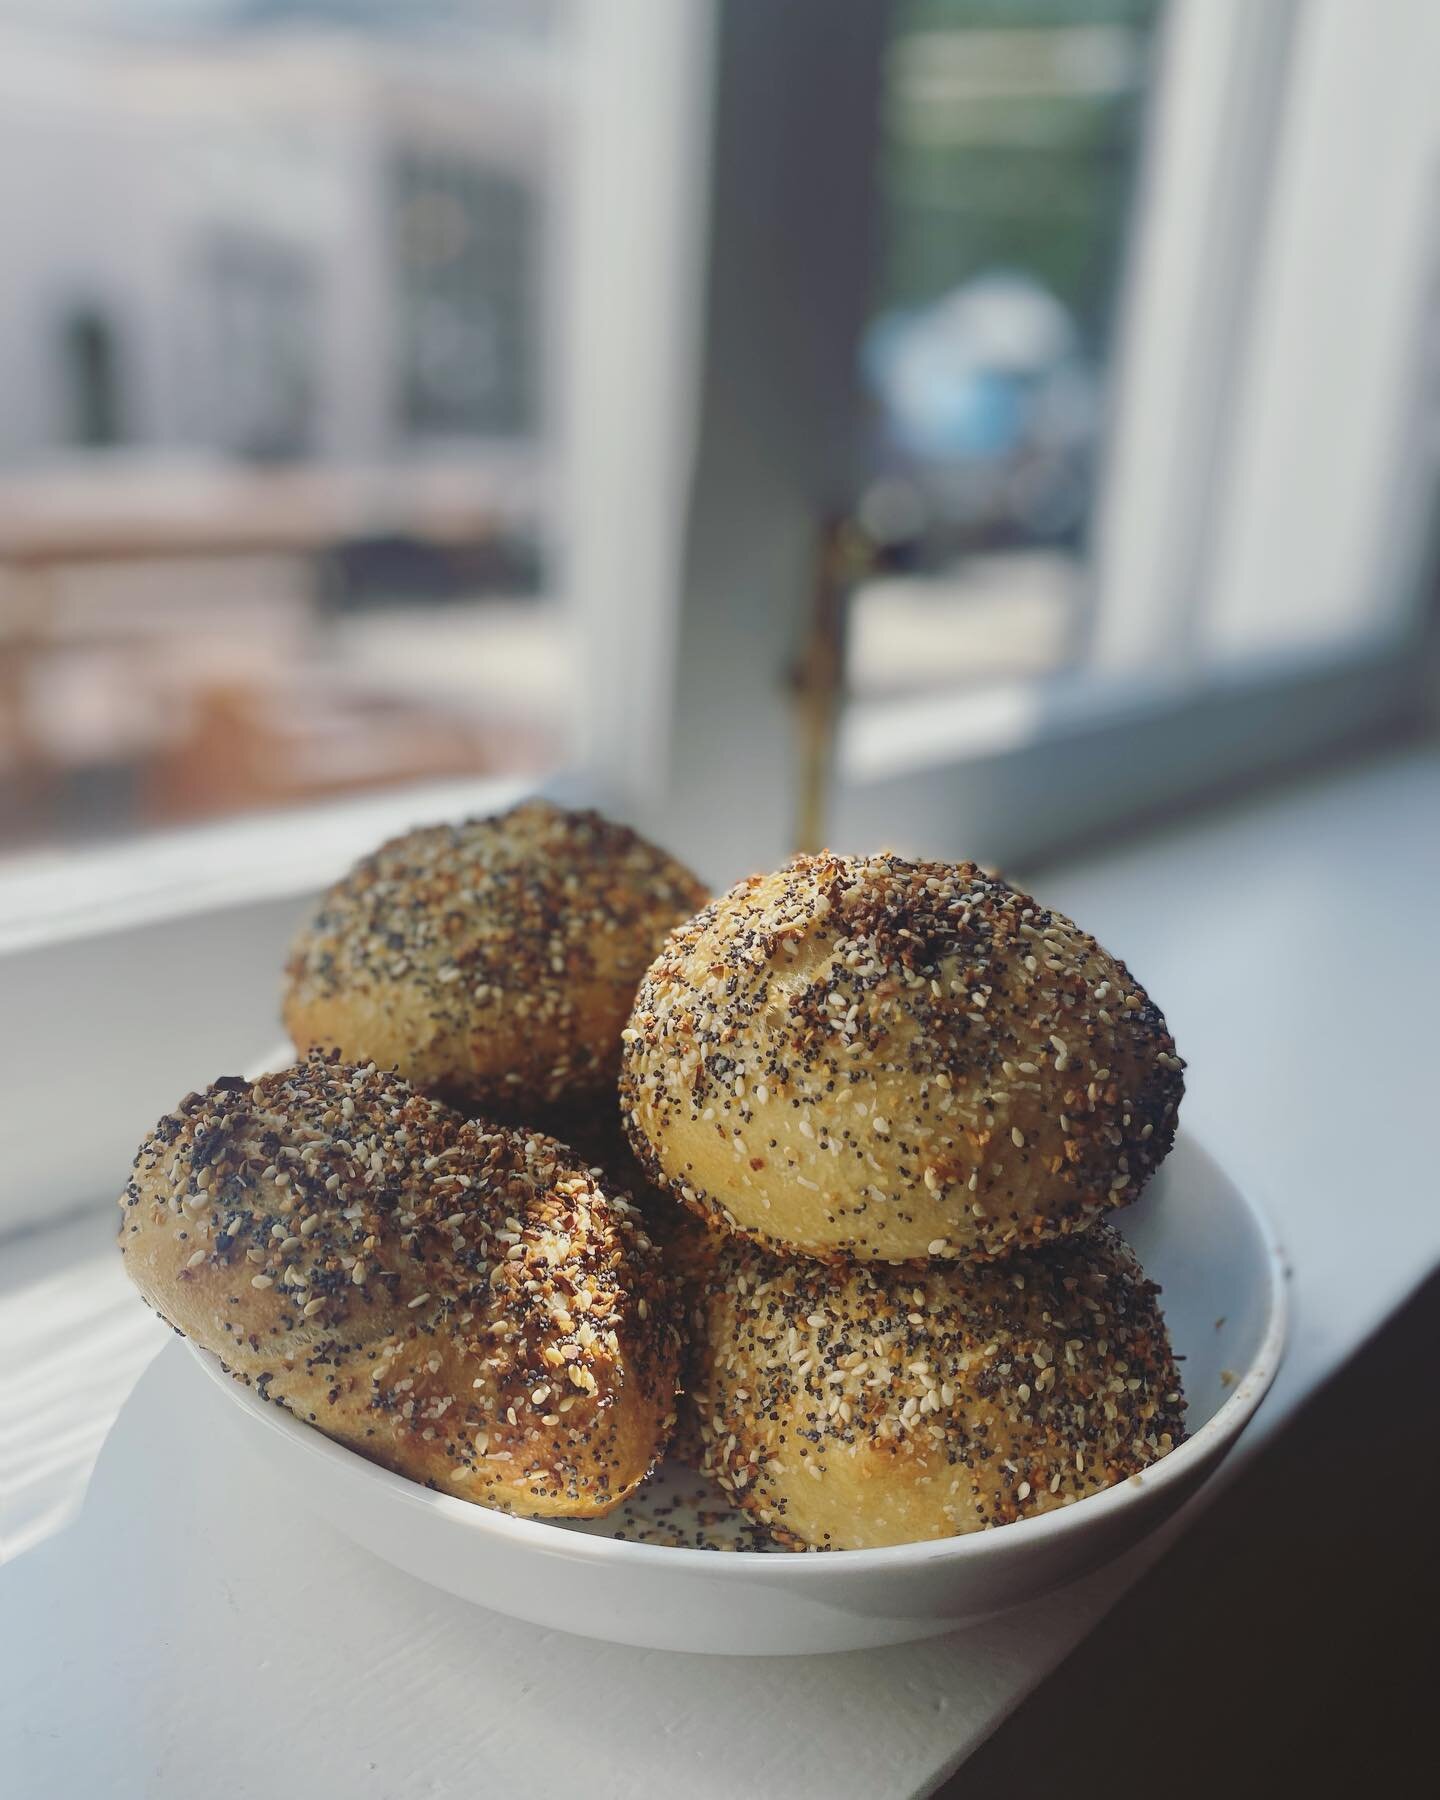 Agora bakery is happy to bring you Bagels! 
Try a bagel breakfast sandwich with bacon egg and cheese🤩

#bagel #bakery #frenchbakery
#frenchcafe #freshbaked #coffee #brunch #breakfast #coffeeshop #shoplocal #eatlocal #pinehurst #pinehurstvillage